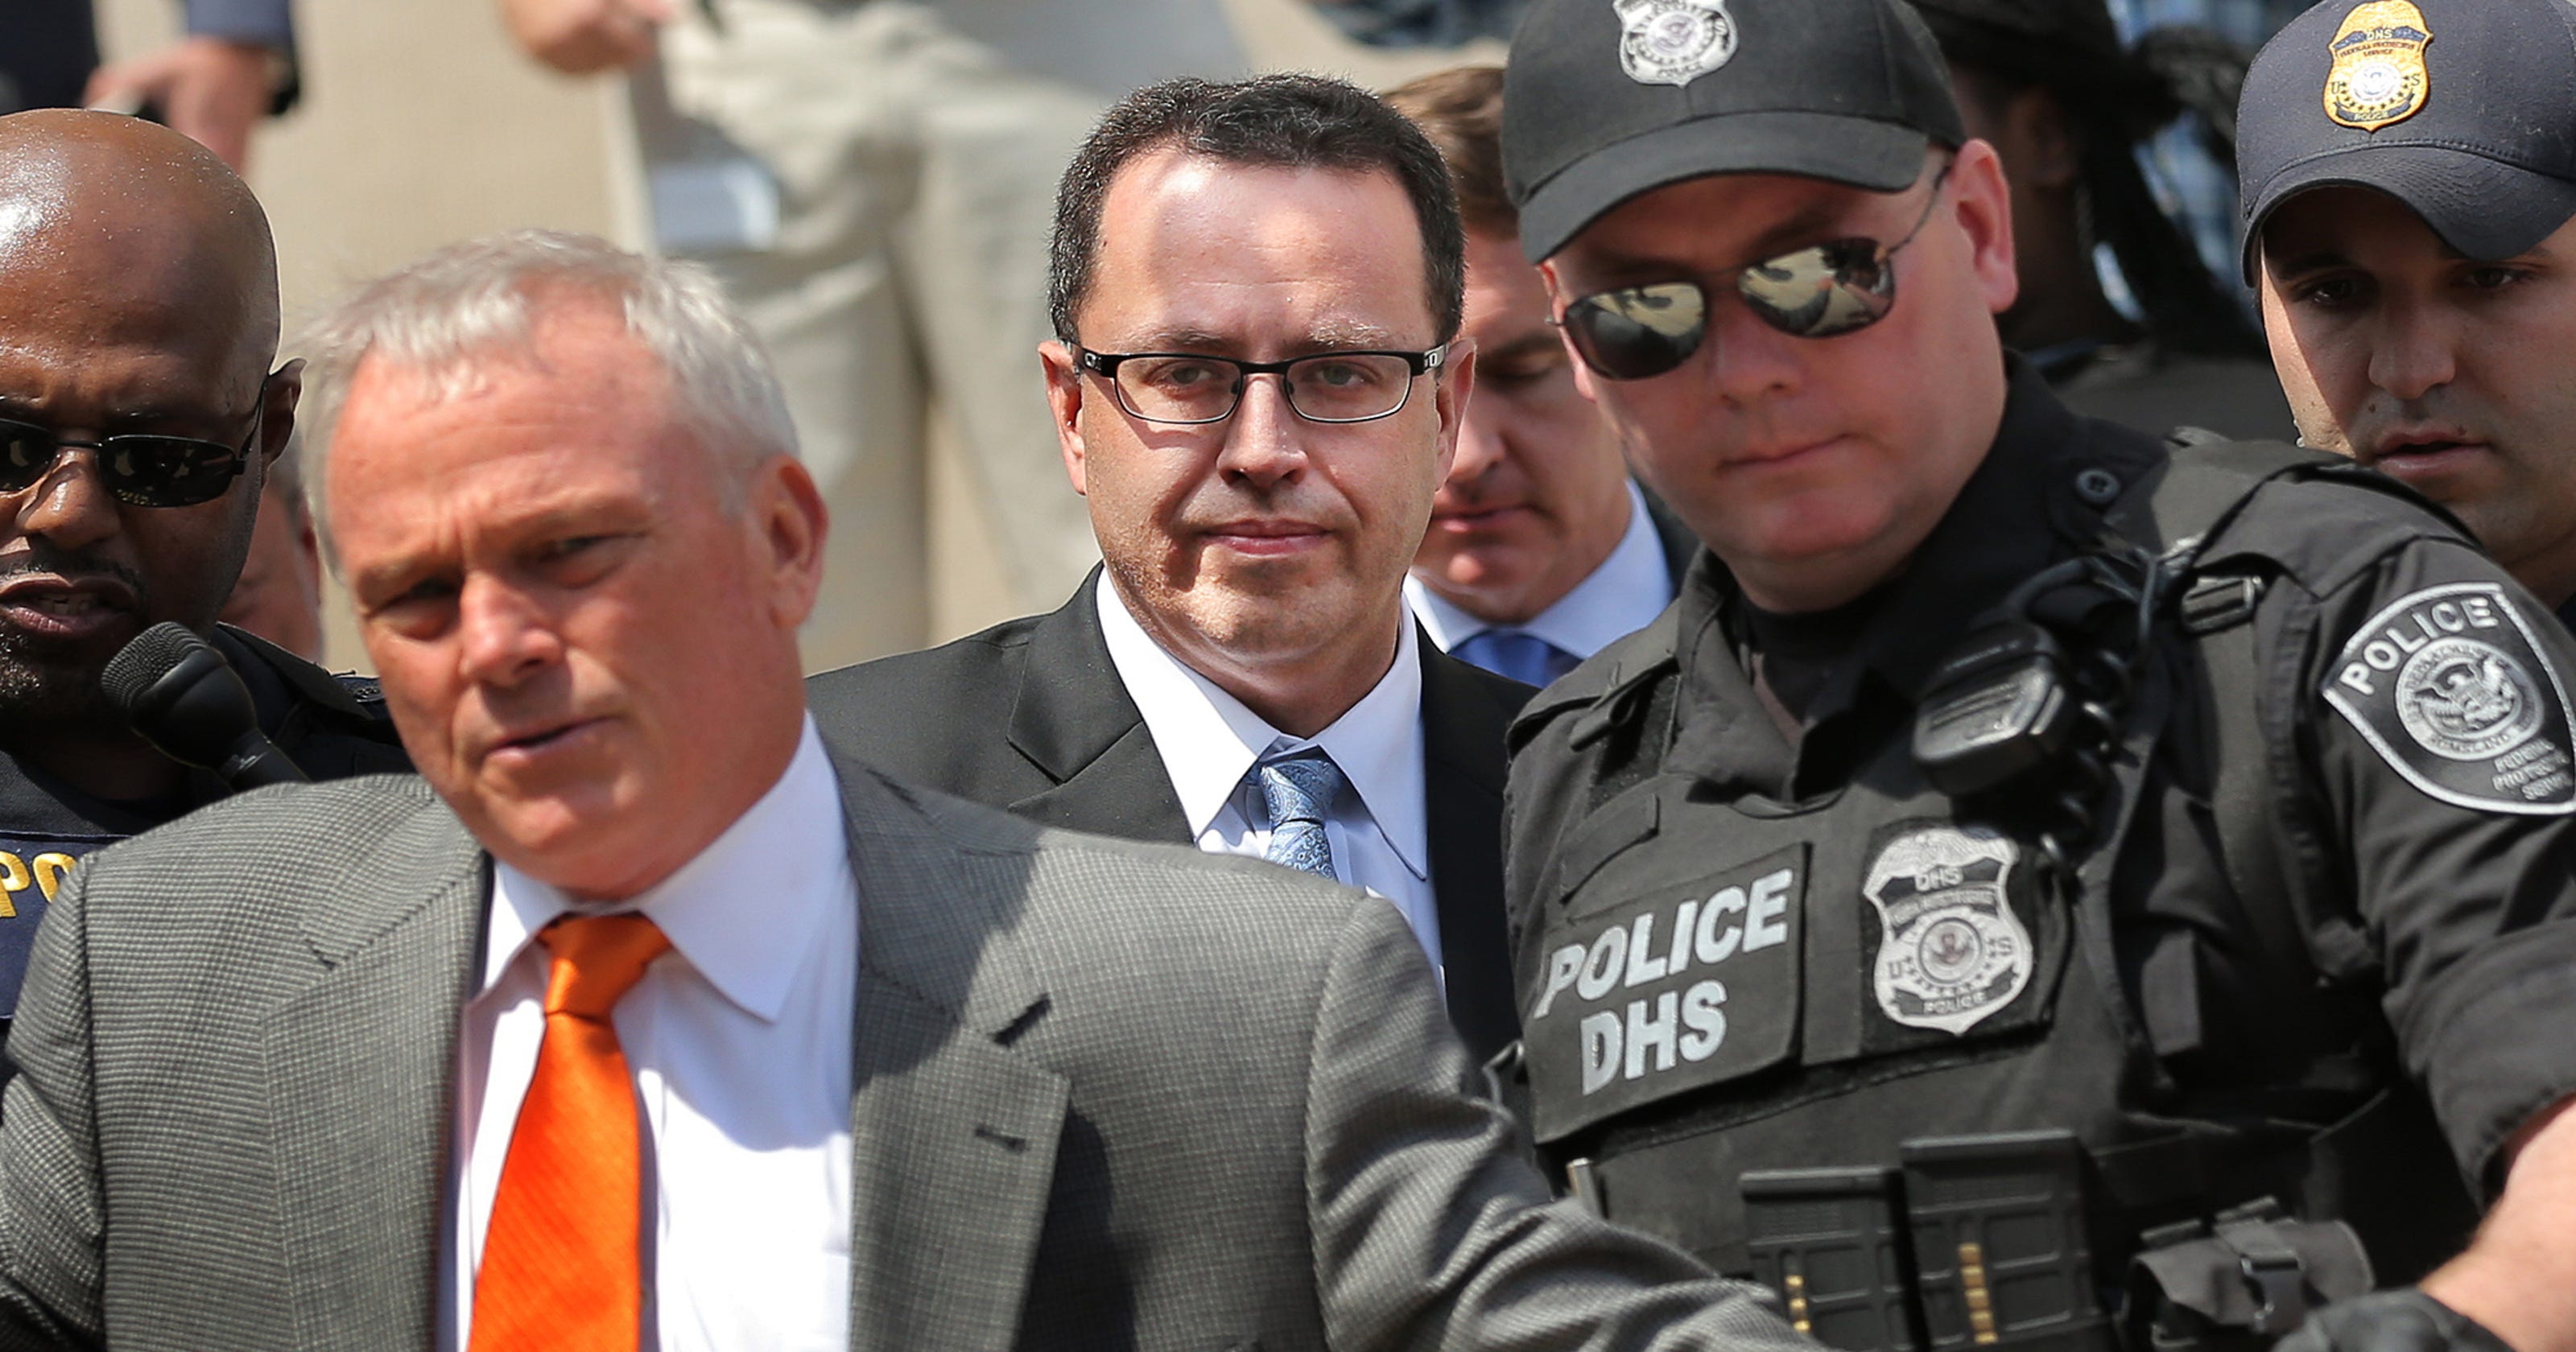 2015 Hottest New Stars - Jared Fogle sought out teen sex, child porn